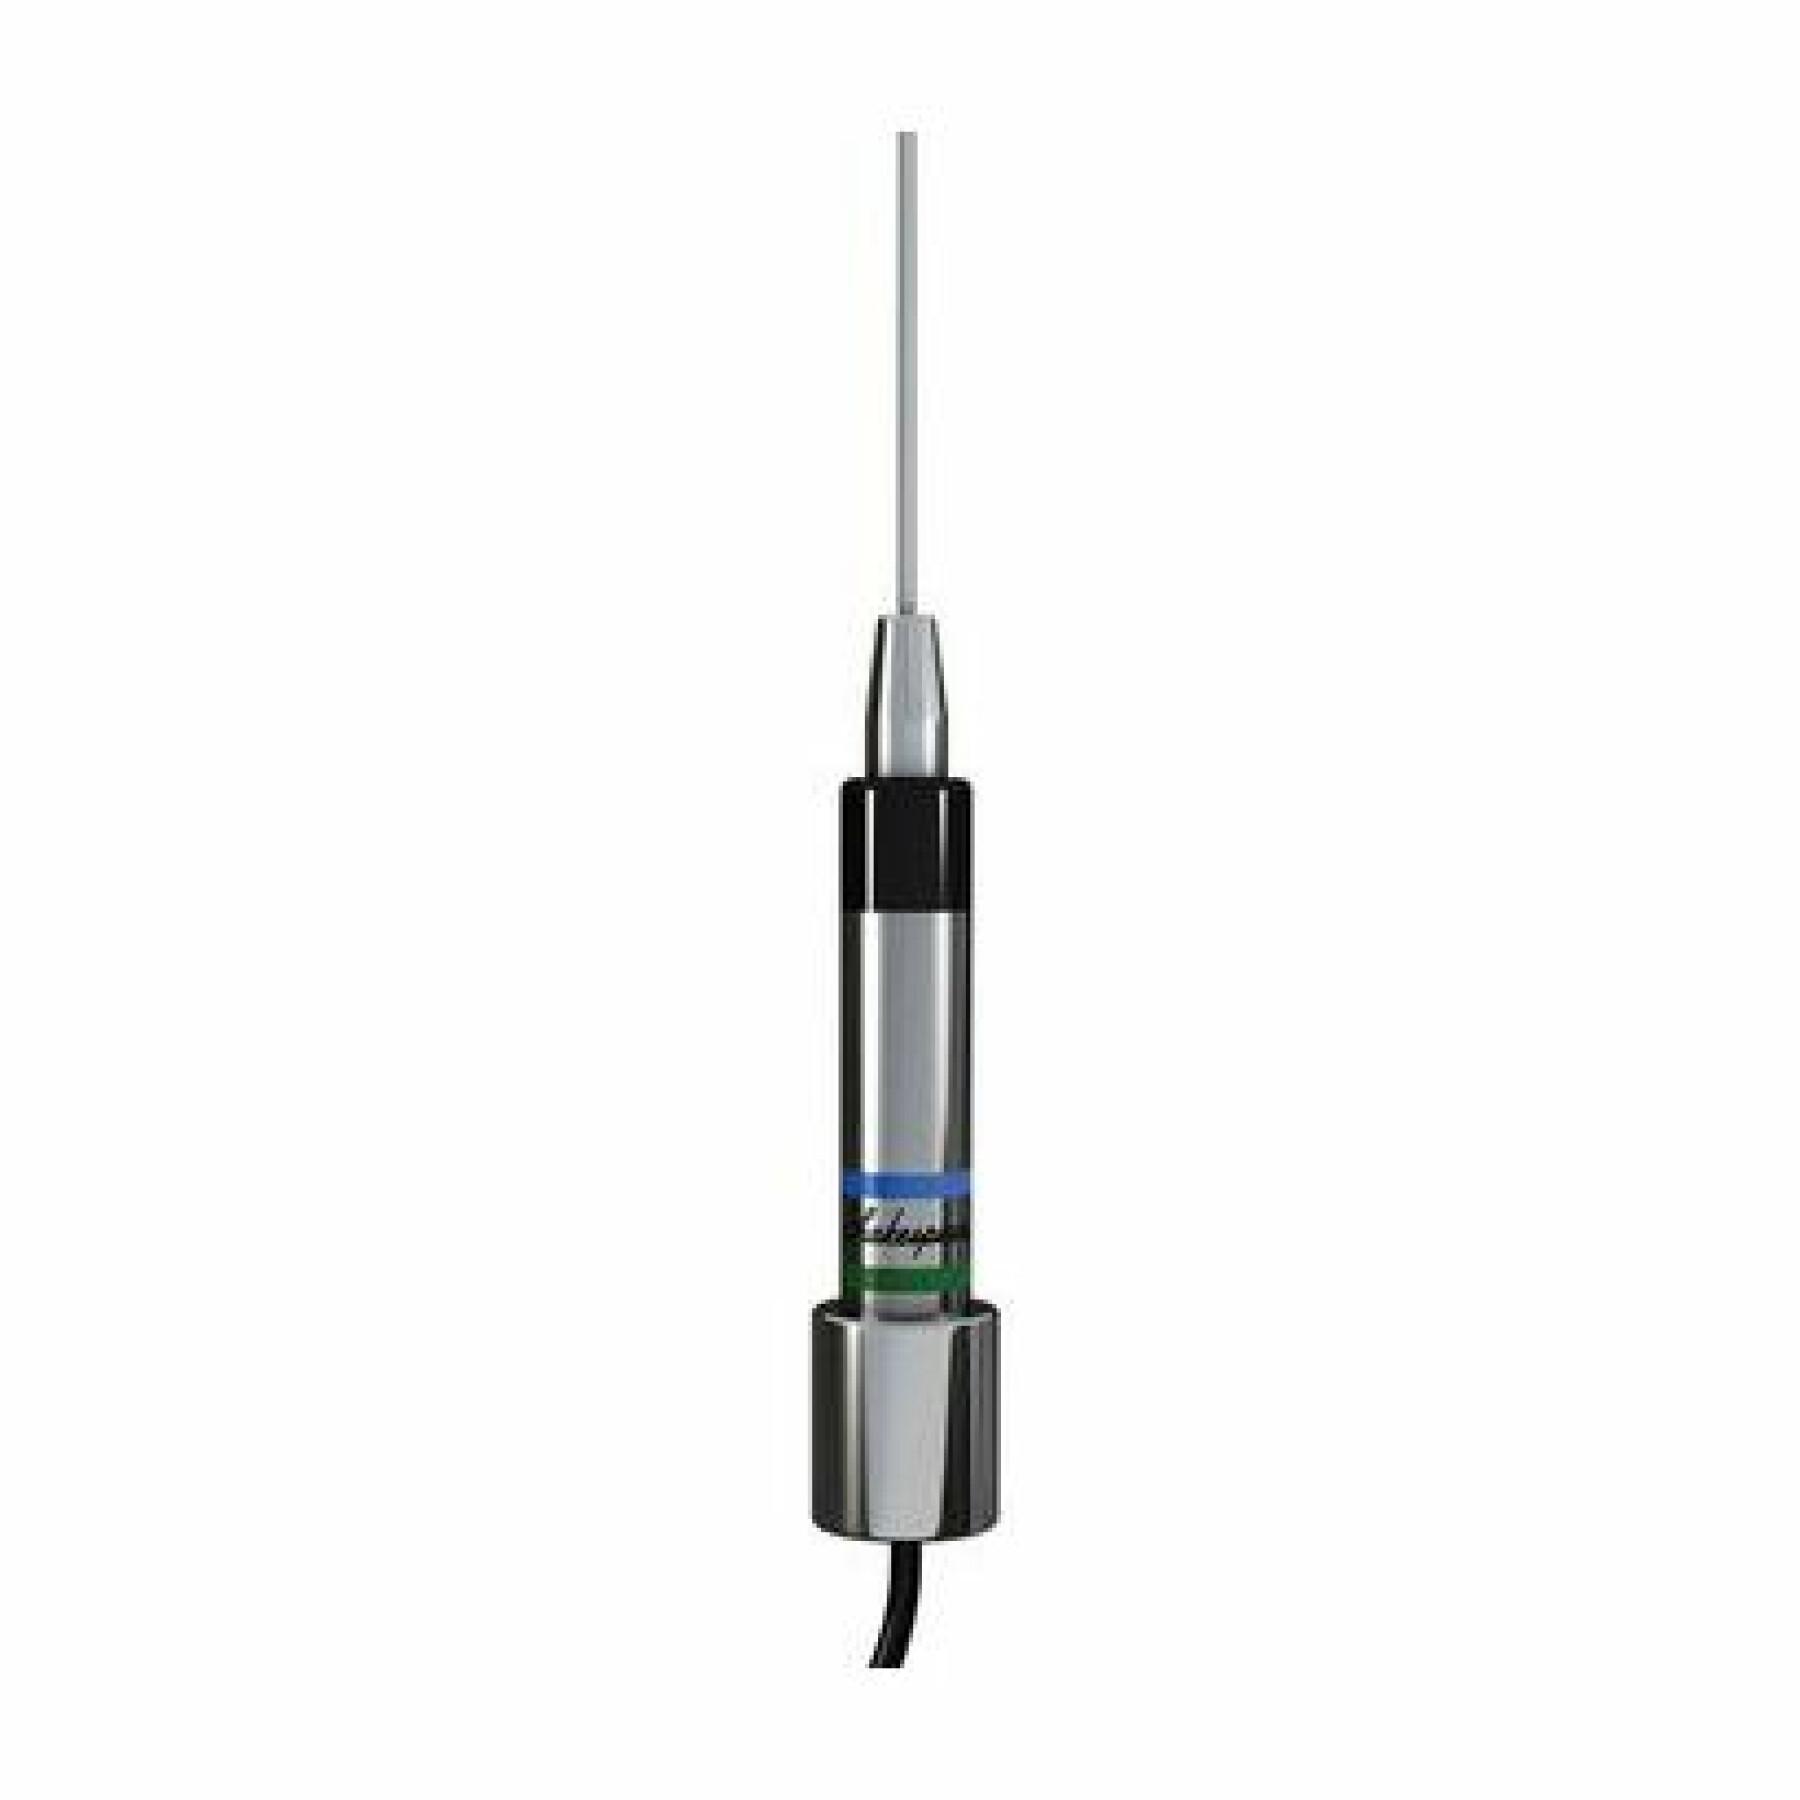 Stainless steel whip antenna with chrome-plated brass ferrule cable Shakespeare 0,9m - 3dB